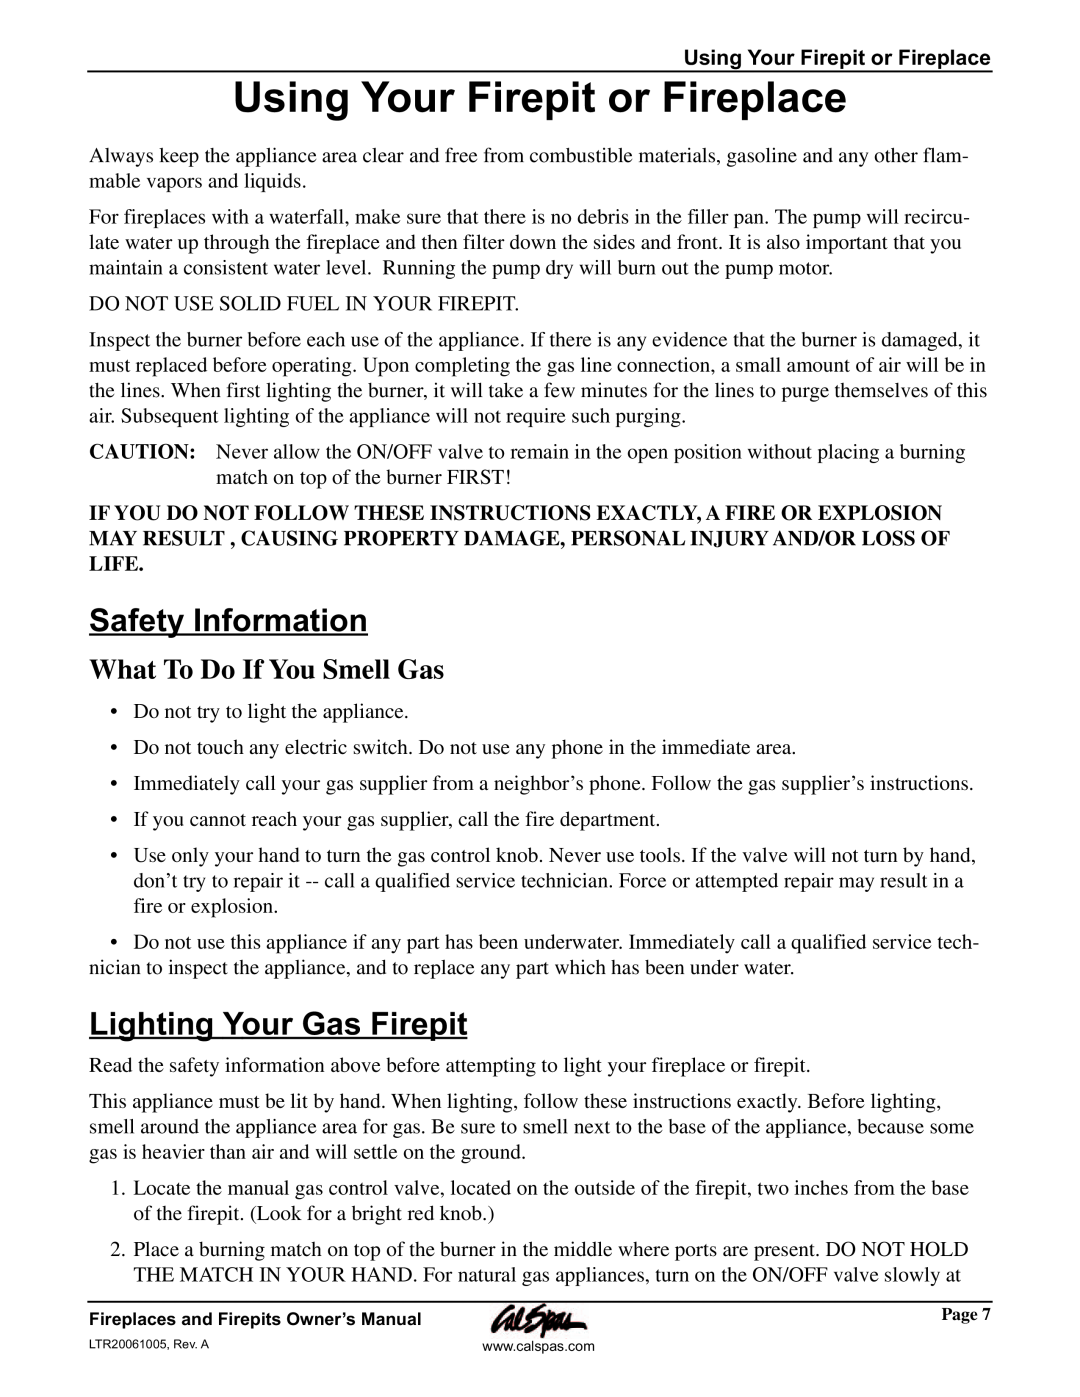 Cal Flame Fireplaces & Firepits 2006 manual Safety Information, Lighting Your Gas Firepit, What To Do If You Smell Gas 